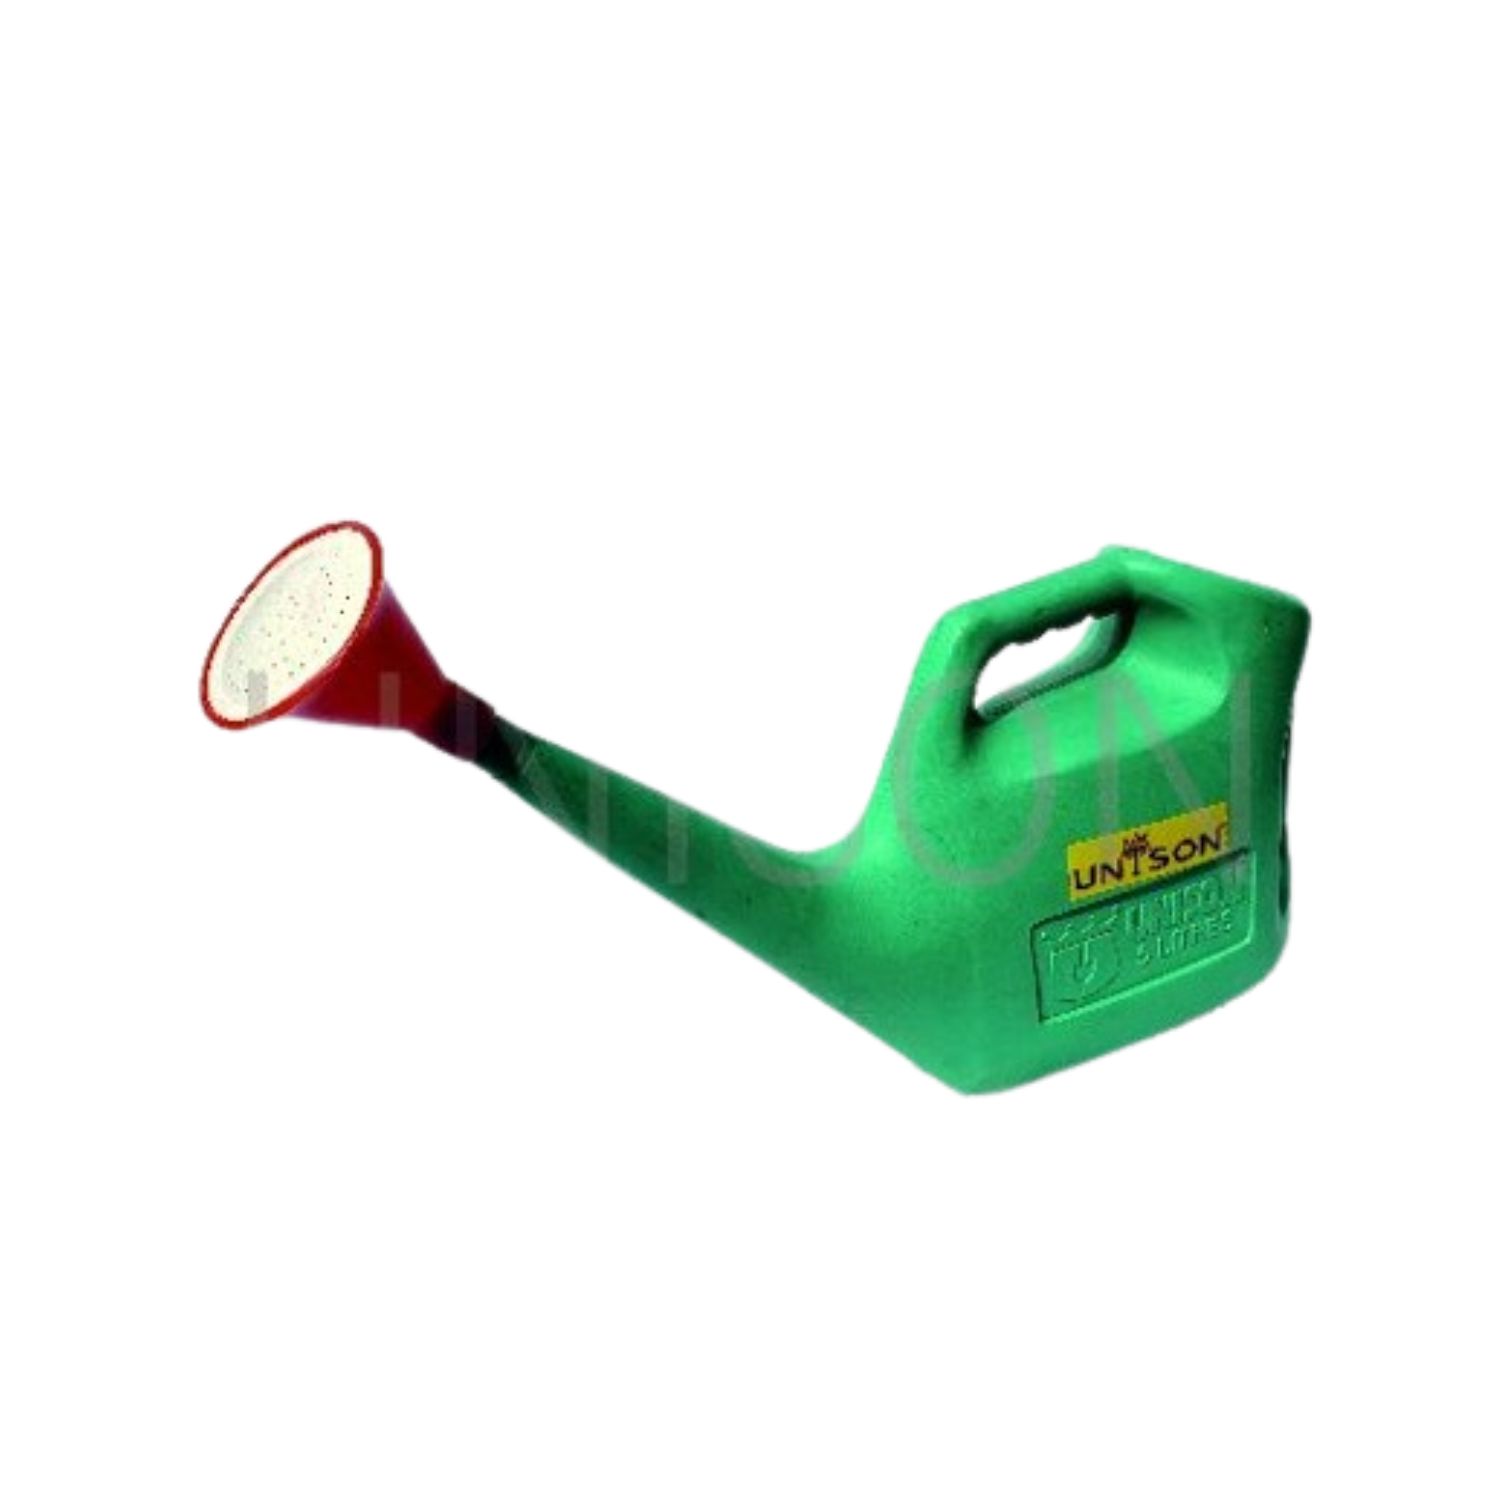  Unison 10 Ltrs Watering Can